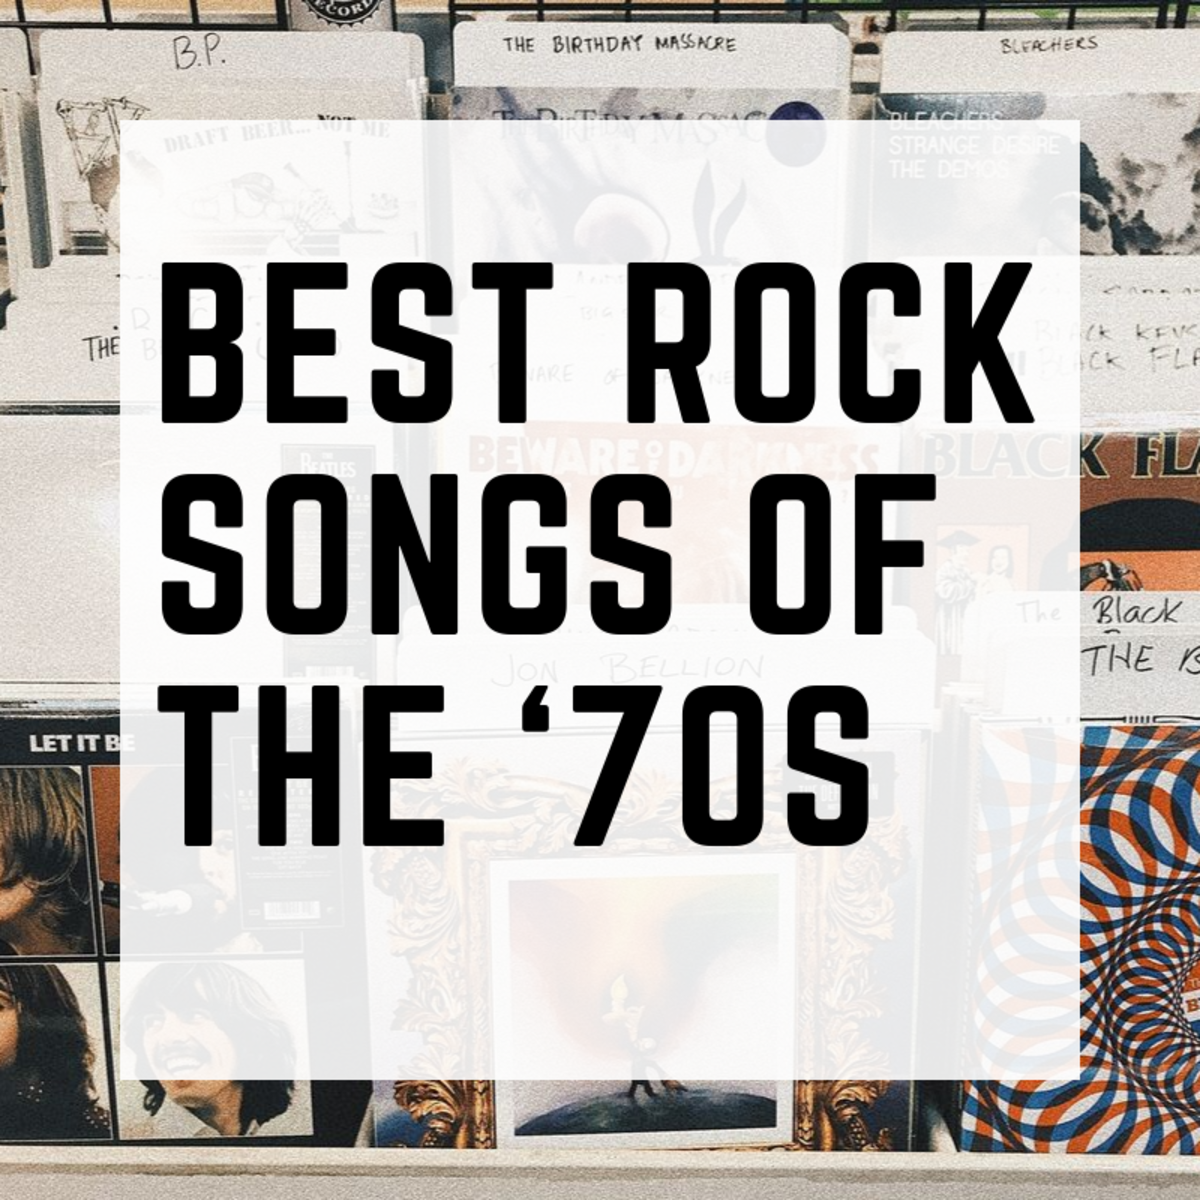 Kyst bestøve Enrich 100 Best Rock Songs of the '70s - Spinditty